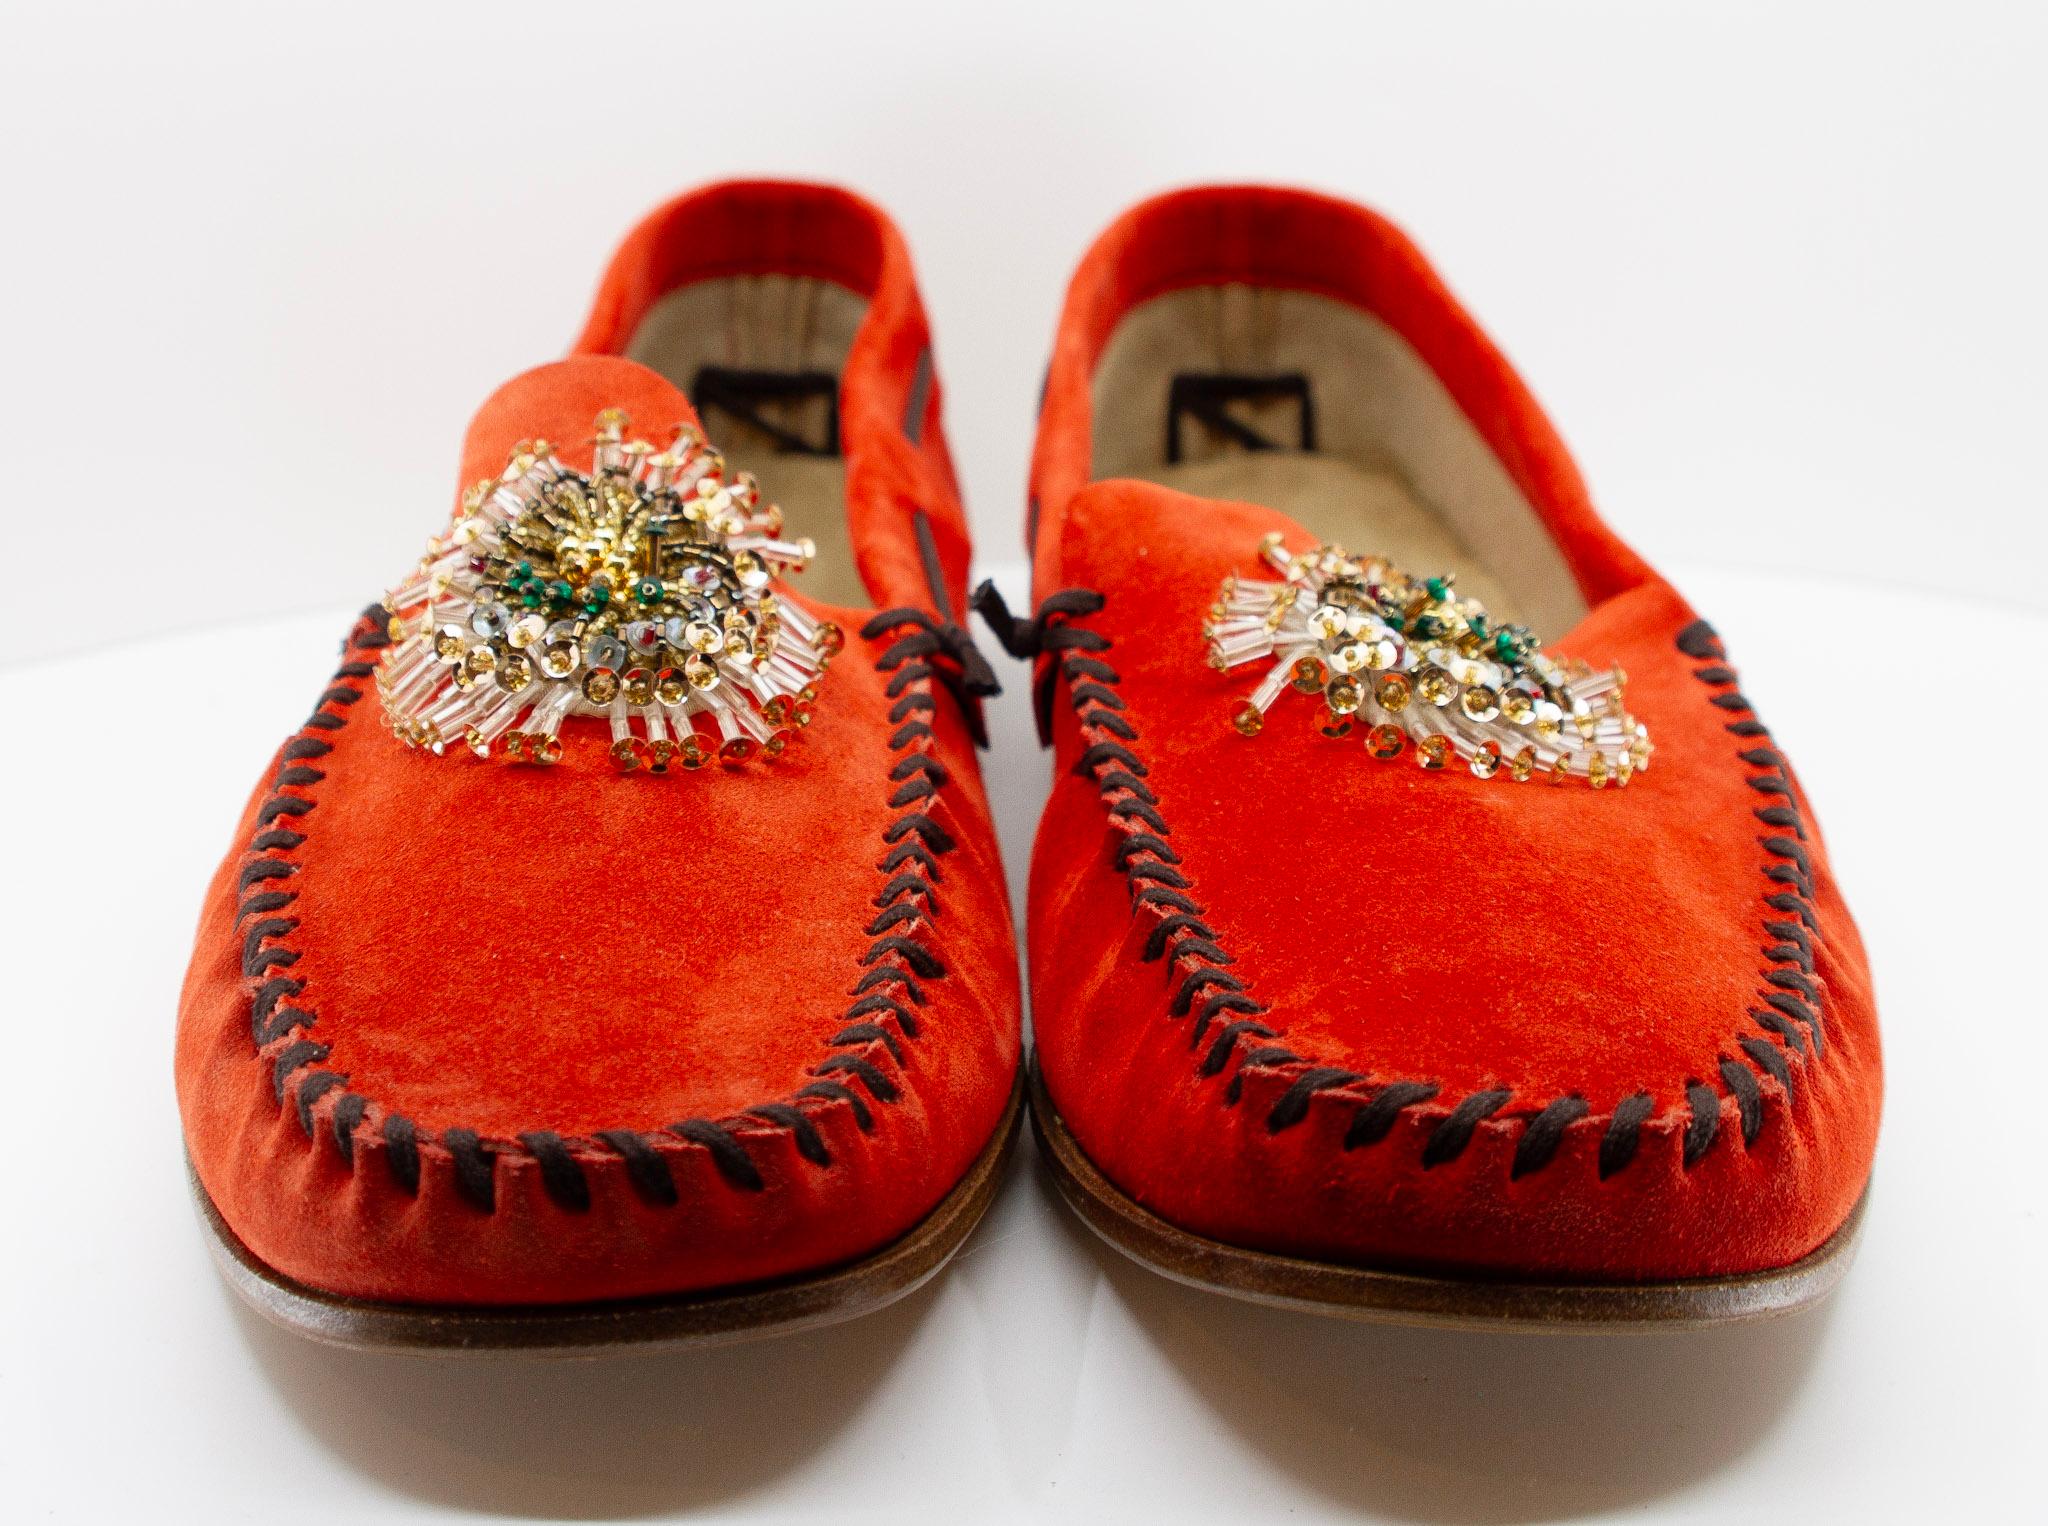 PRADA, vermilion, suede, loafers with beaded embellishments and leather soles, Estate of André Leon Talley.

New condition.

Given to André Leon Talley by Prada, never worn.

Size 14